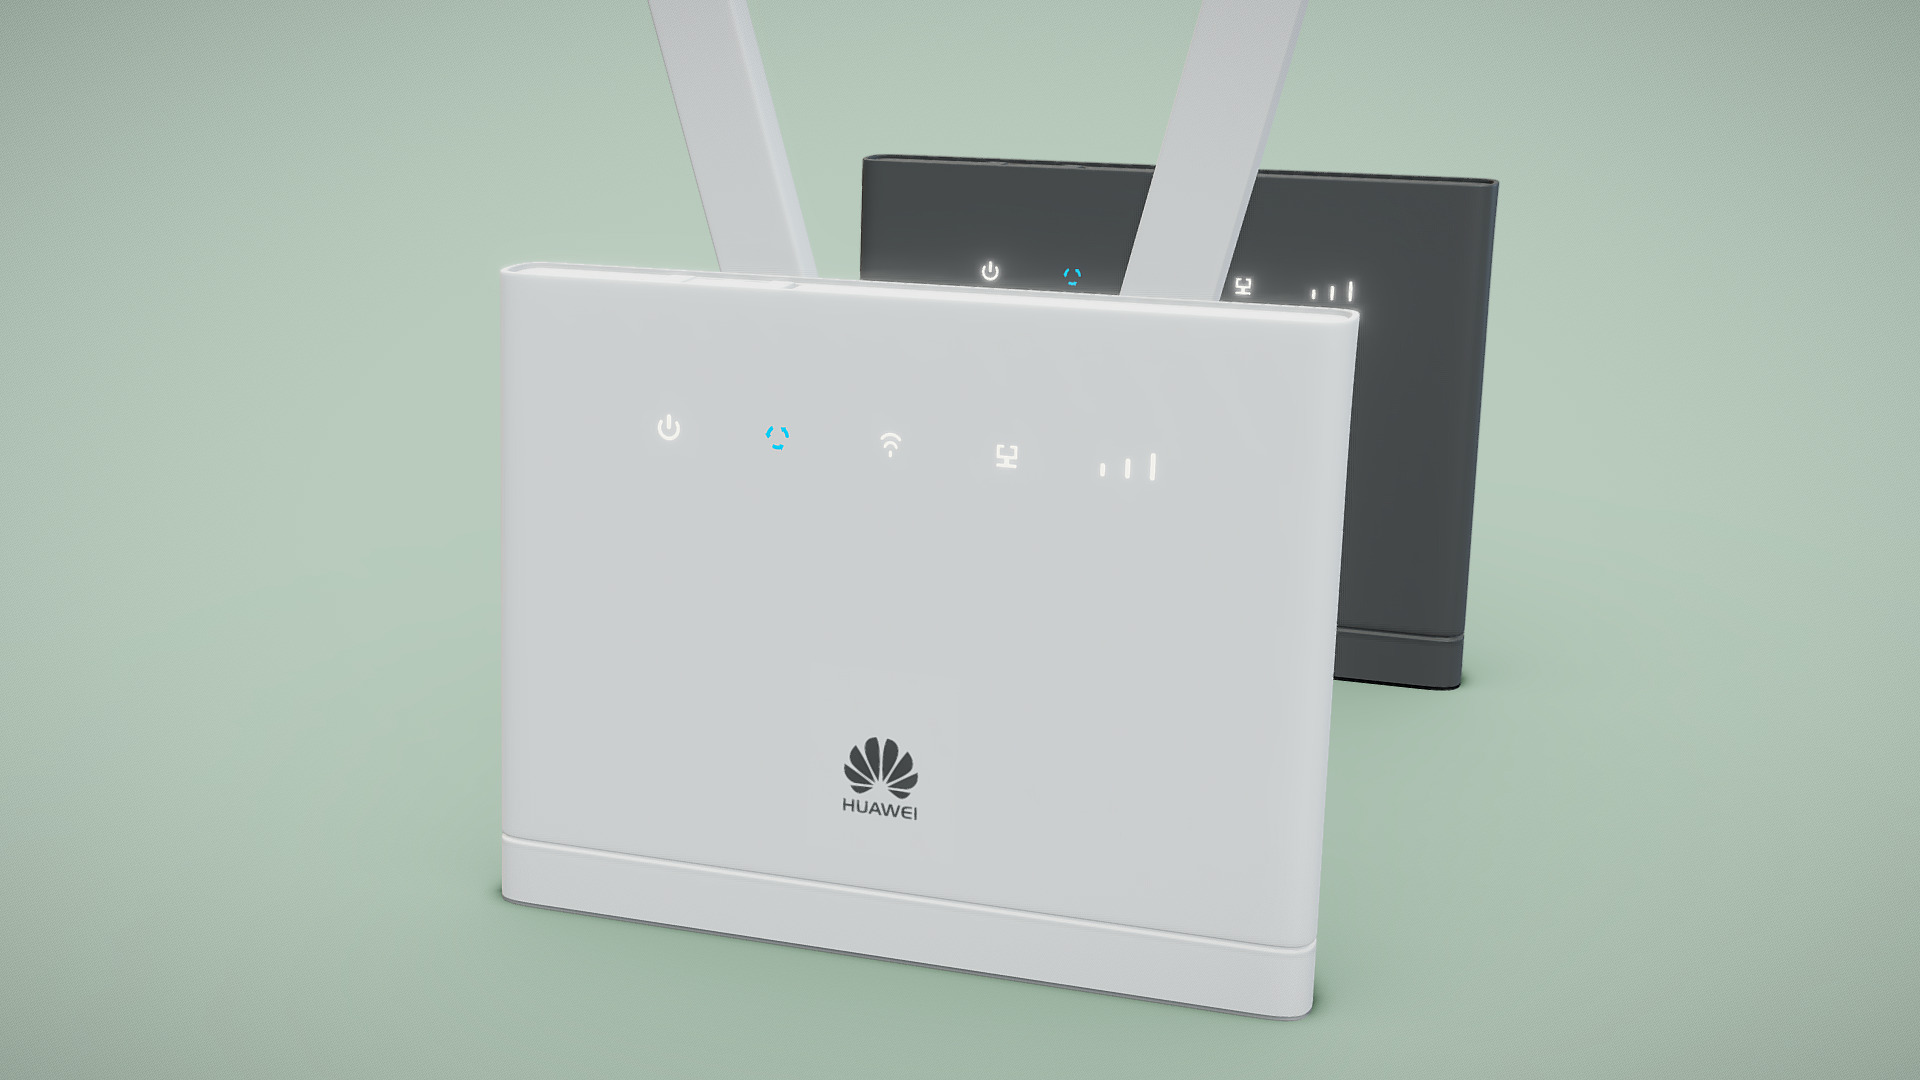 3D model WiFi Router Huawei B315 - This is a 3D model of the WiFi Router Huawei B315. The 3D model is about a white box with a black screen.